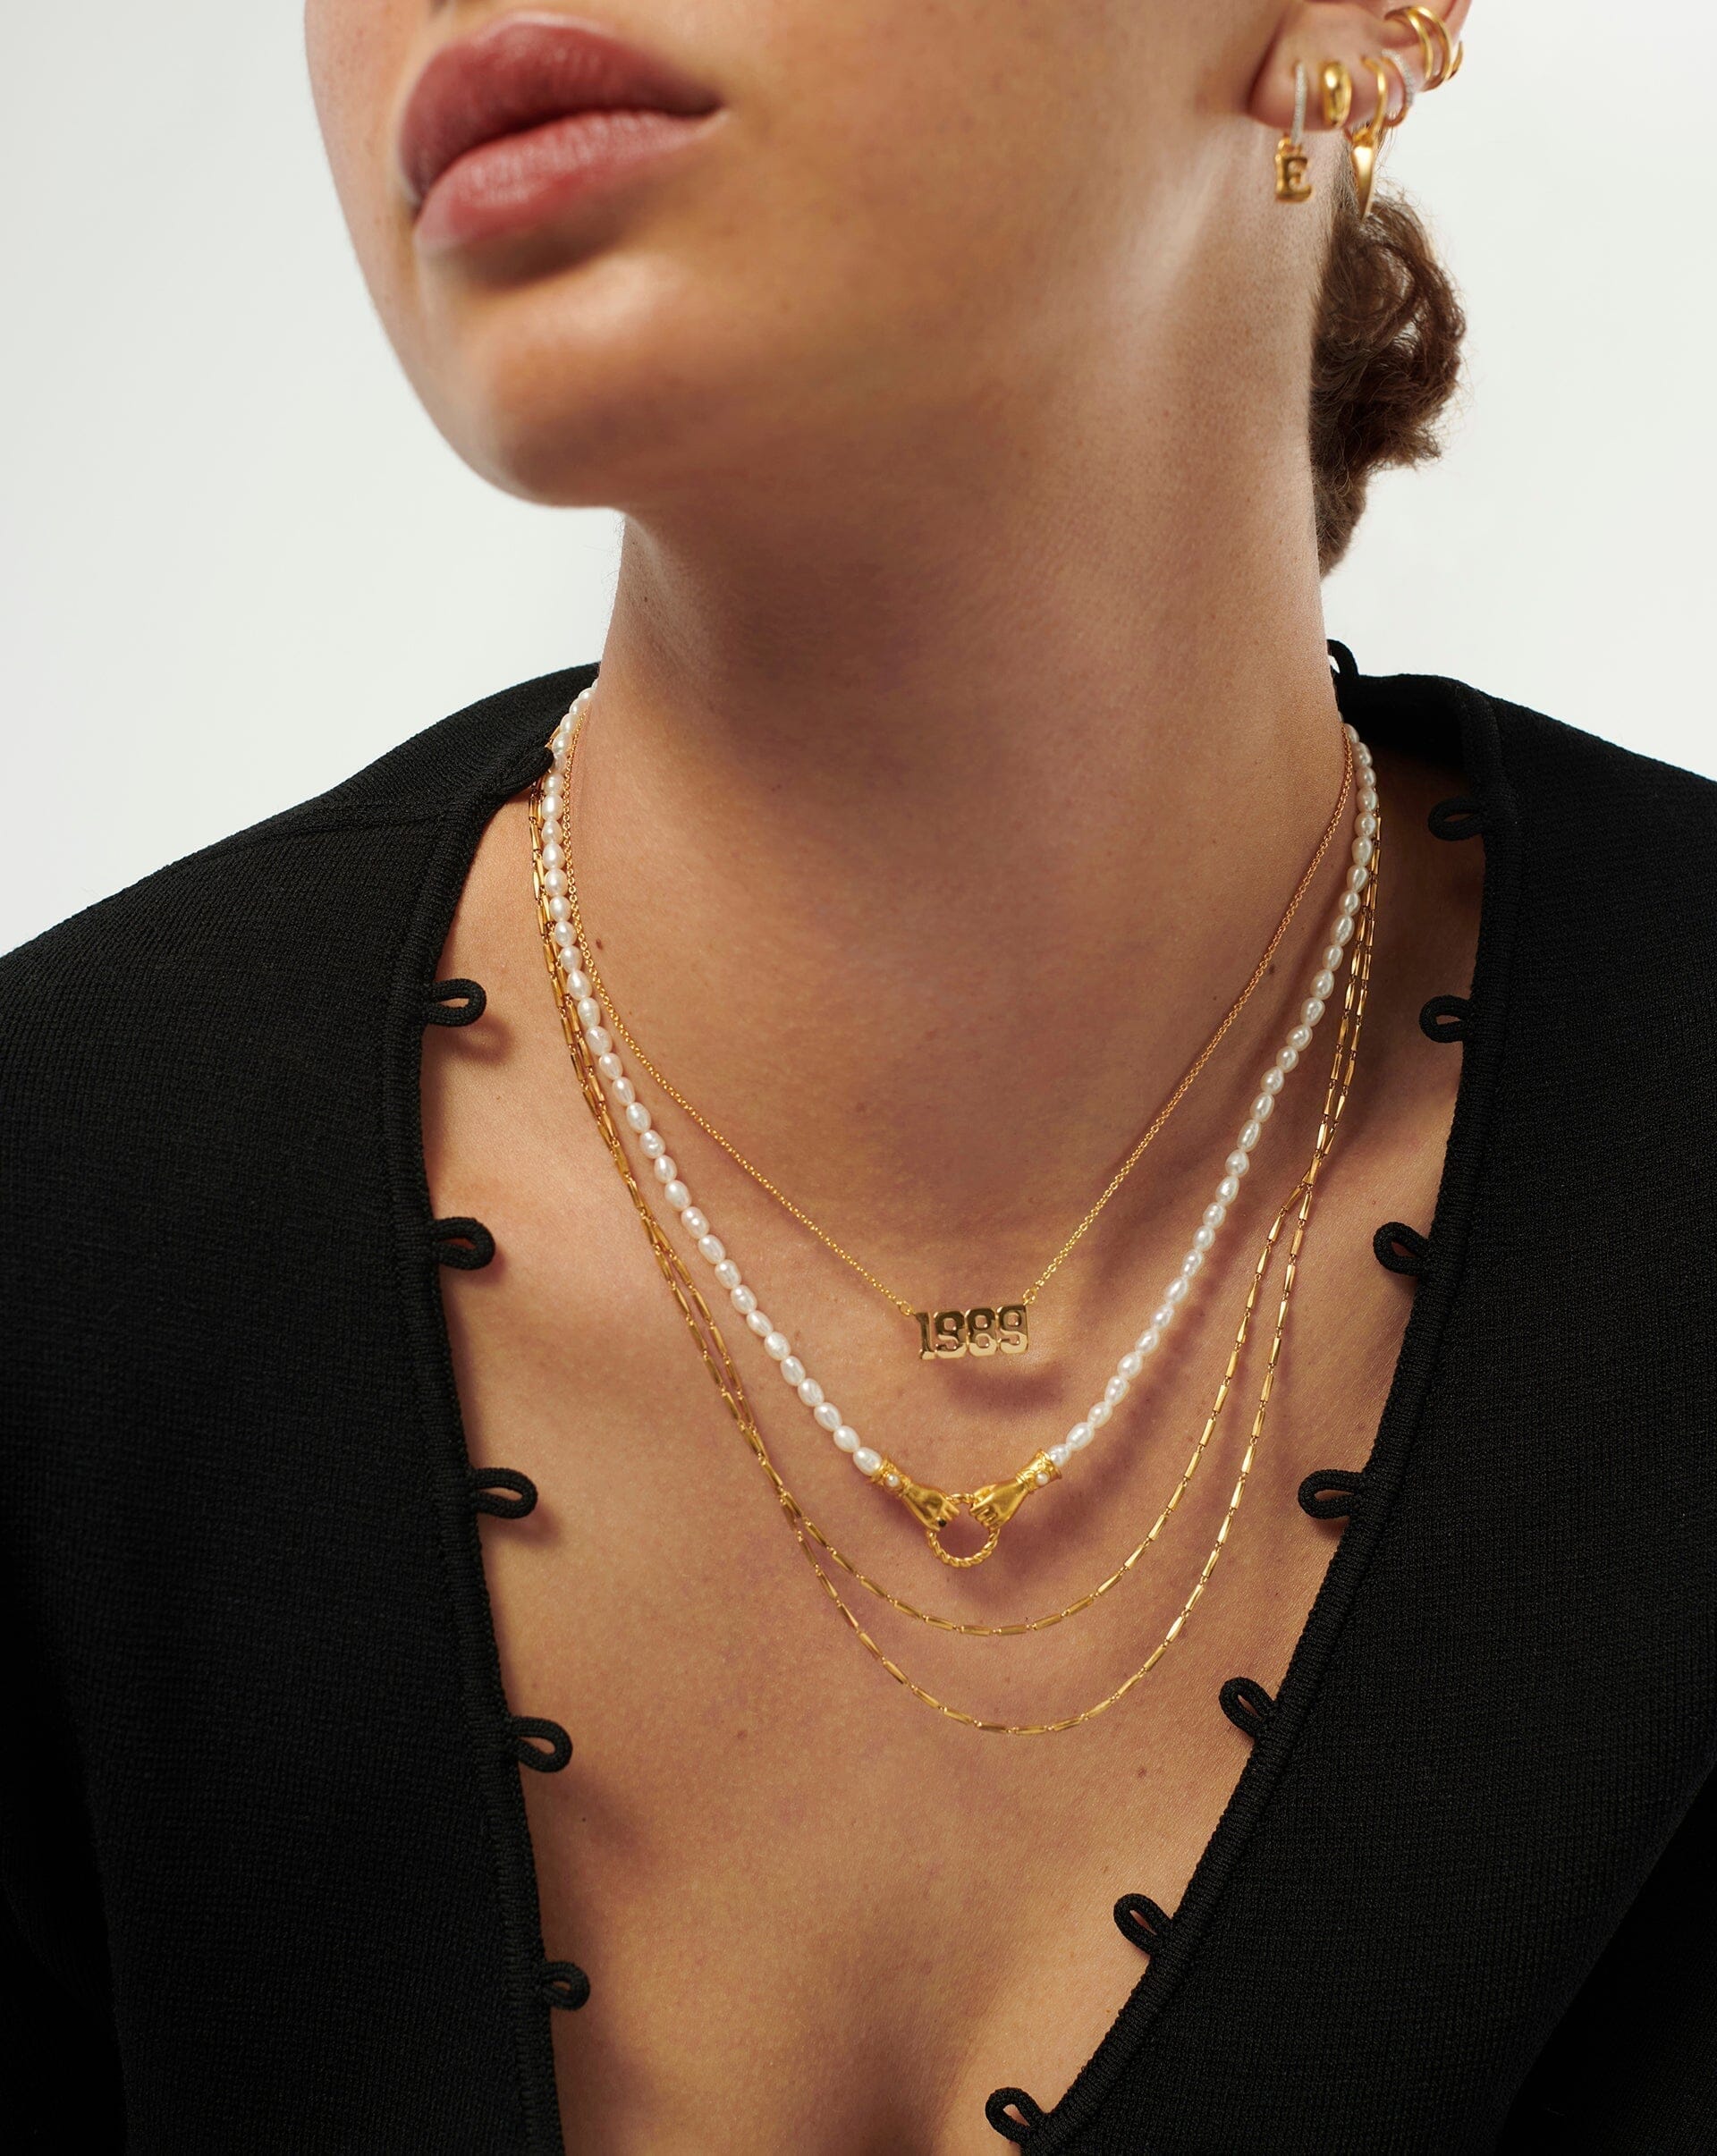 Birth Year Necklace - Year 1989 | 18ct Gold Plated Vermeil Necklaces Missoma 